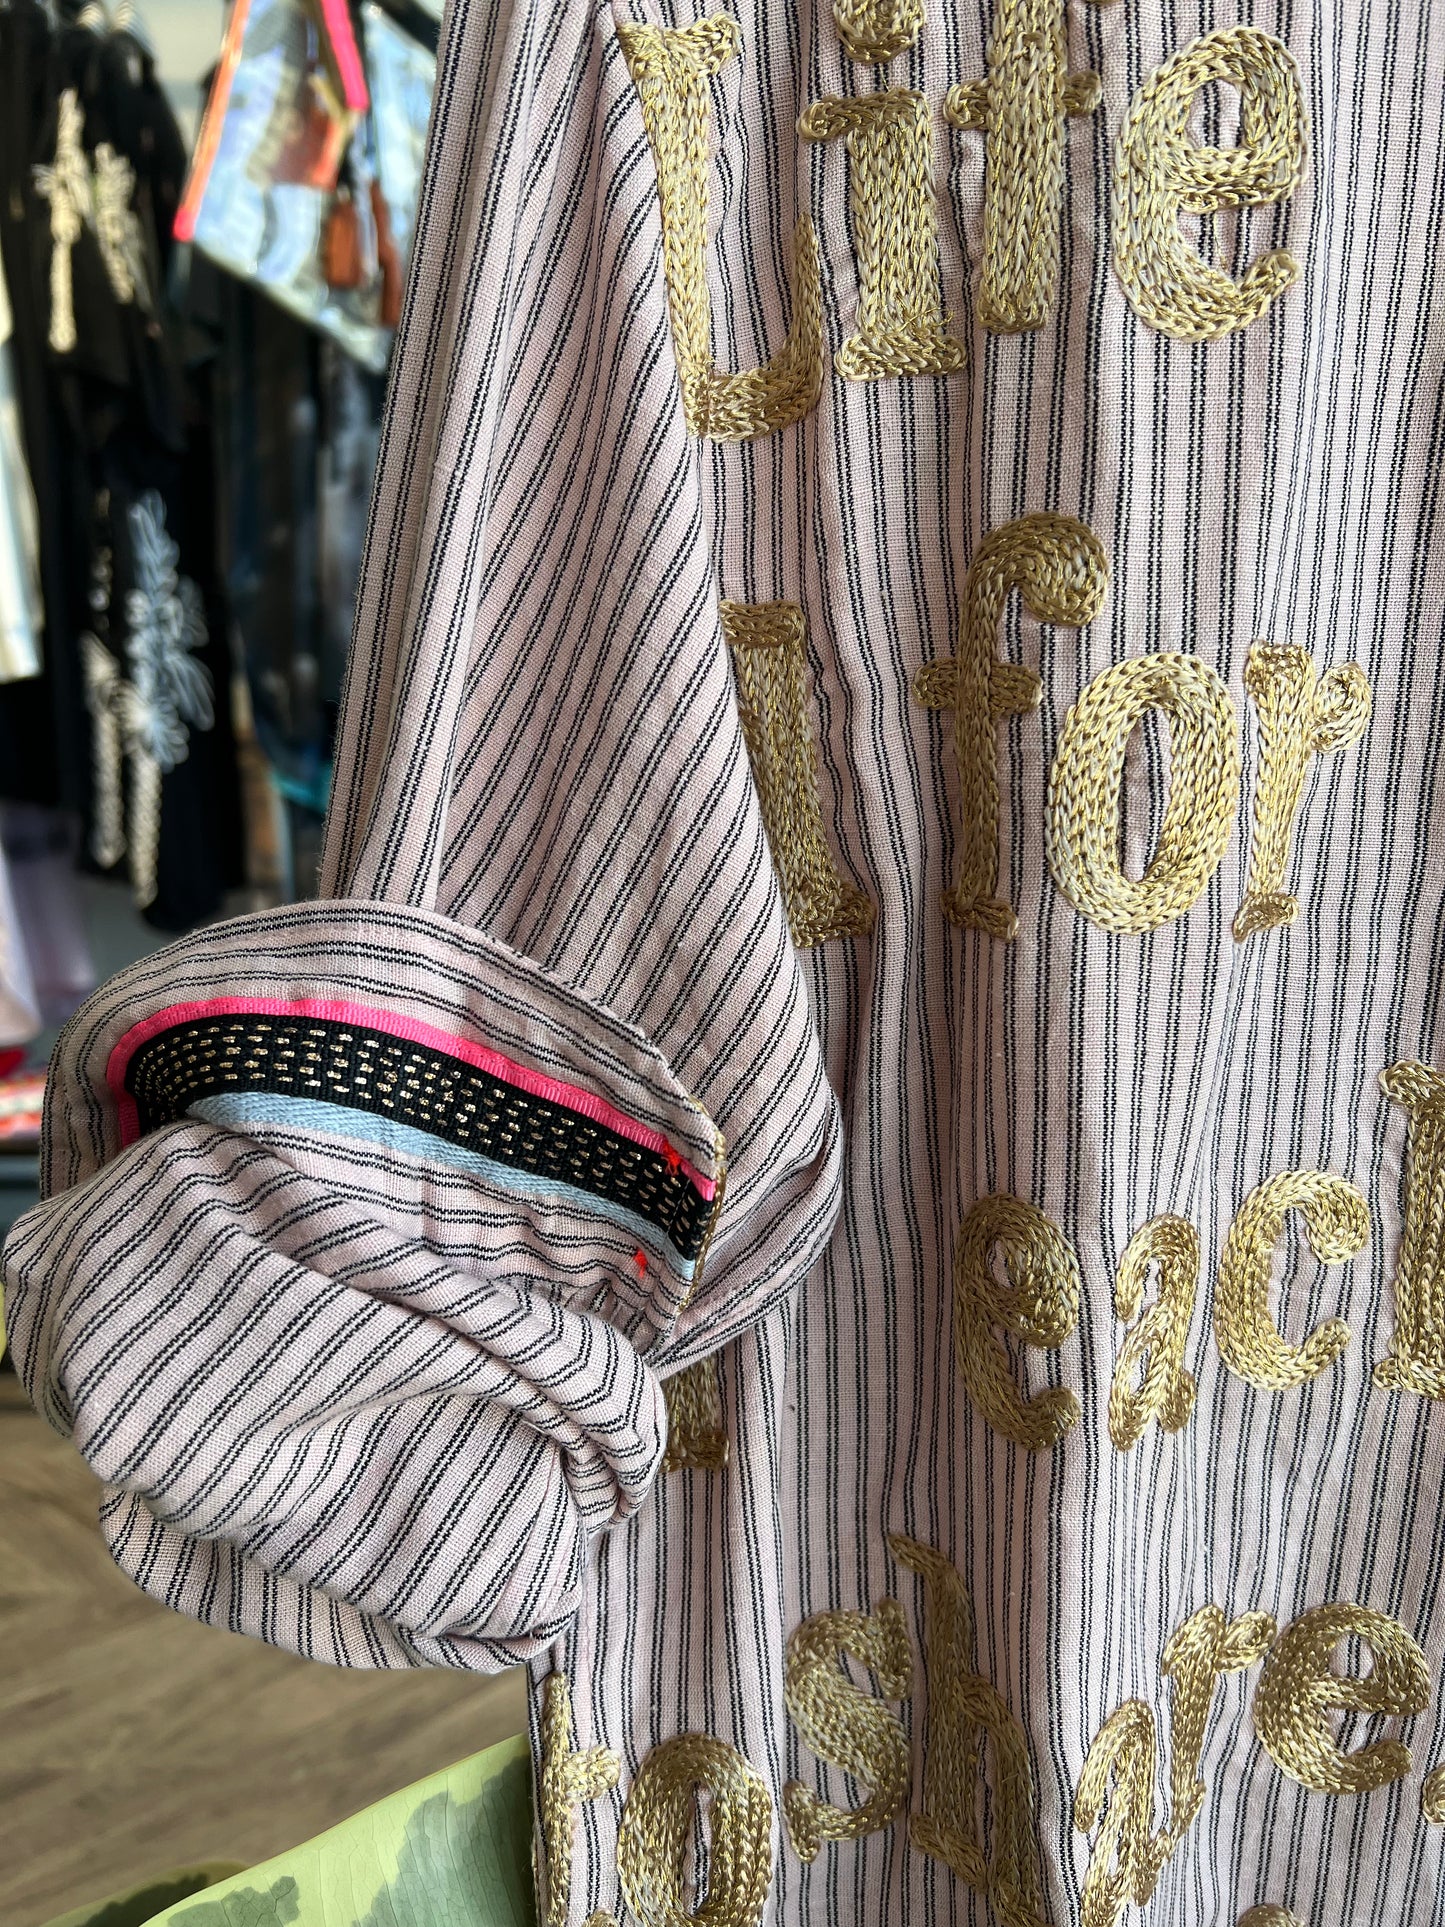 Button Up Shirt Pink Stripes with Gold Embroidery